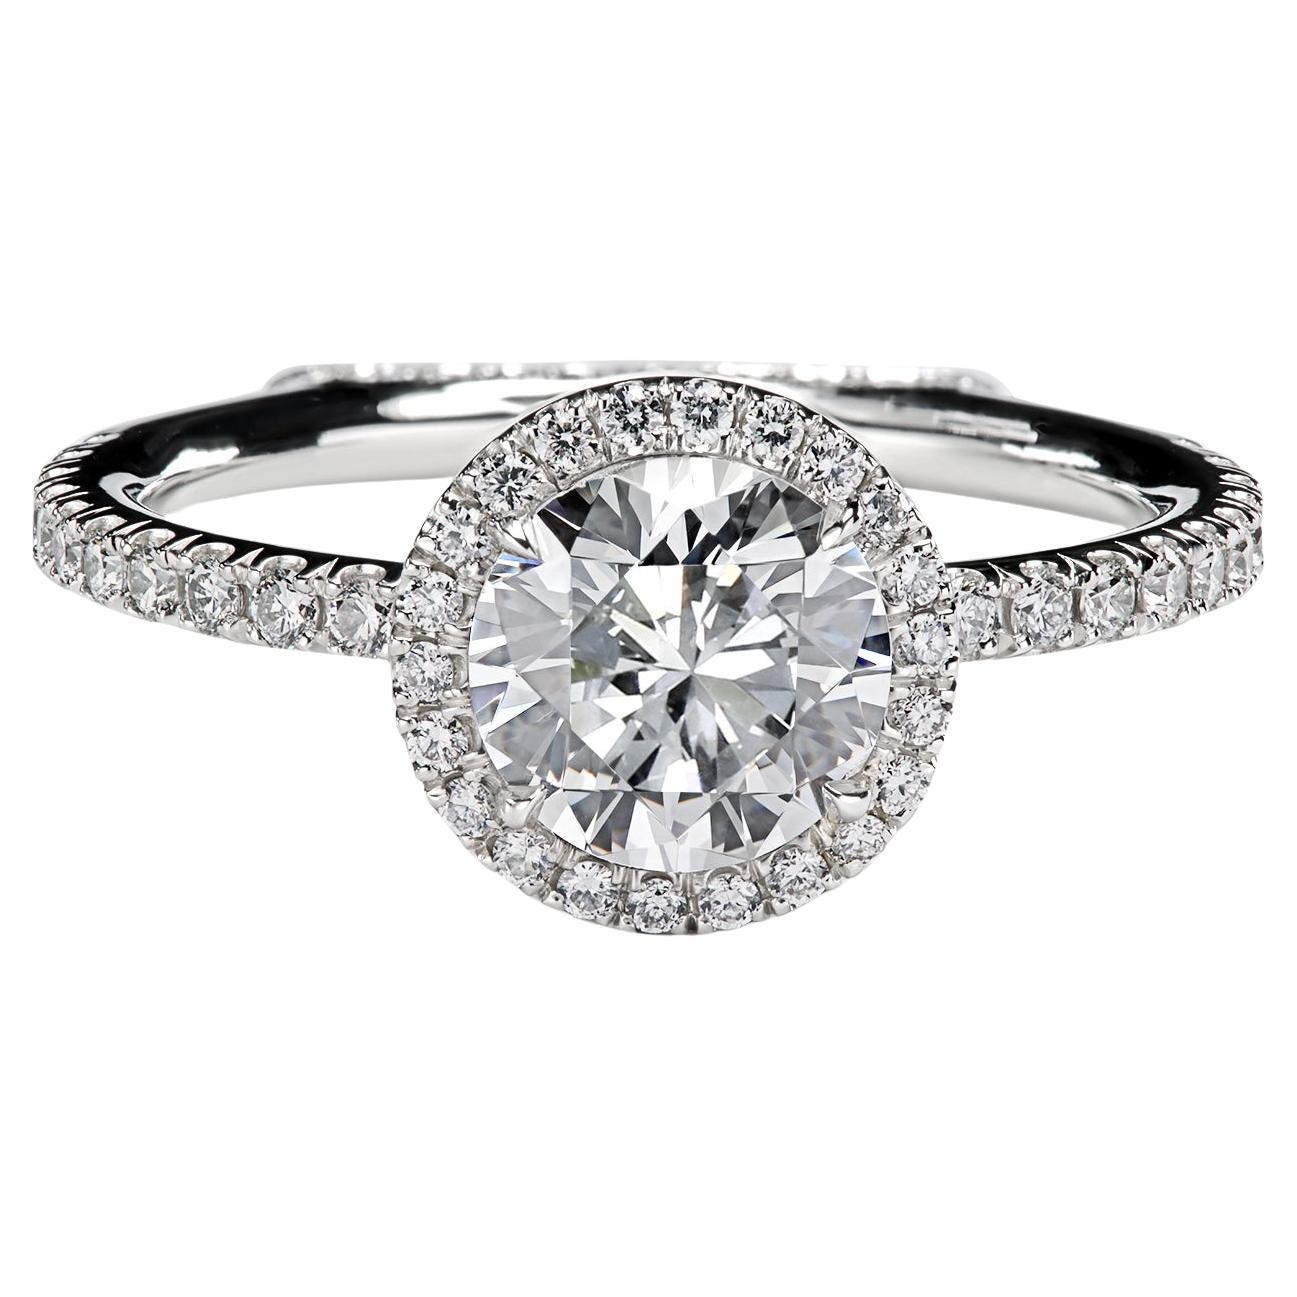 Leon Mege "Jesolo" platinum halo engagement ring with natural round diamond For Sale